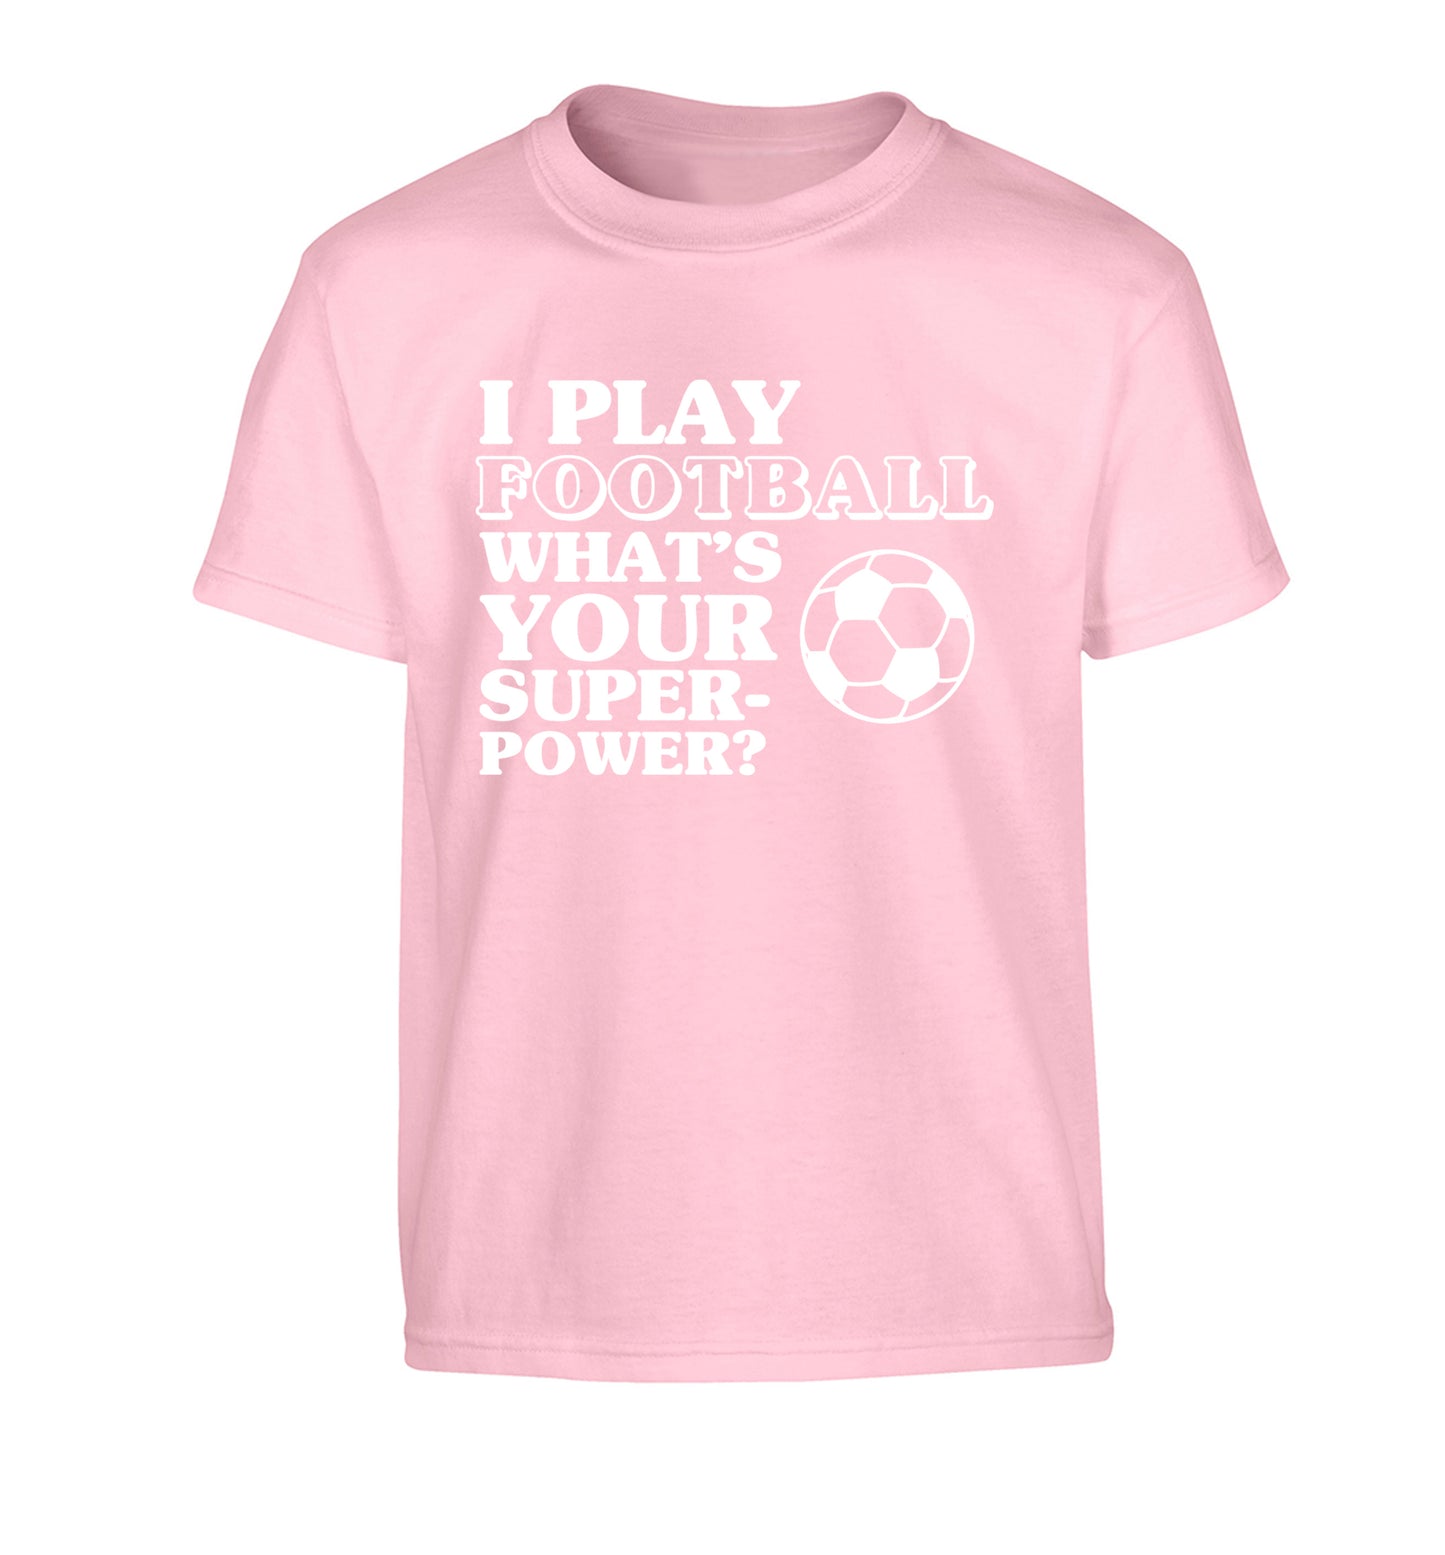 I play football what's your superpower? Children's light pink Tshirt 12-14 Years